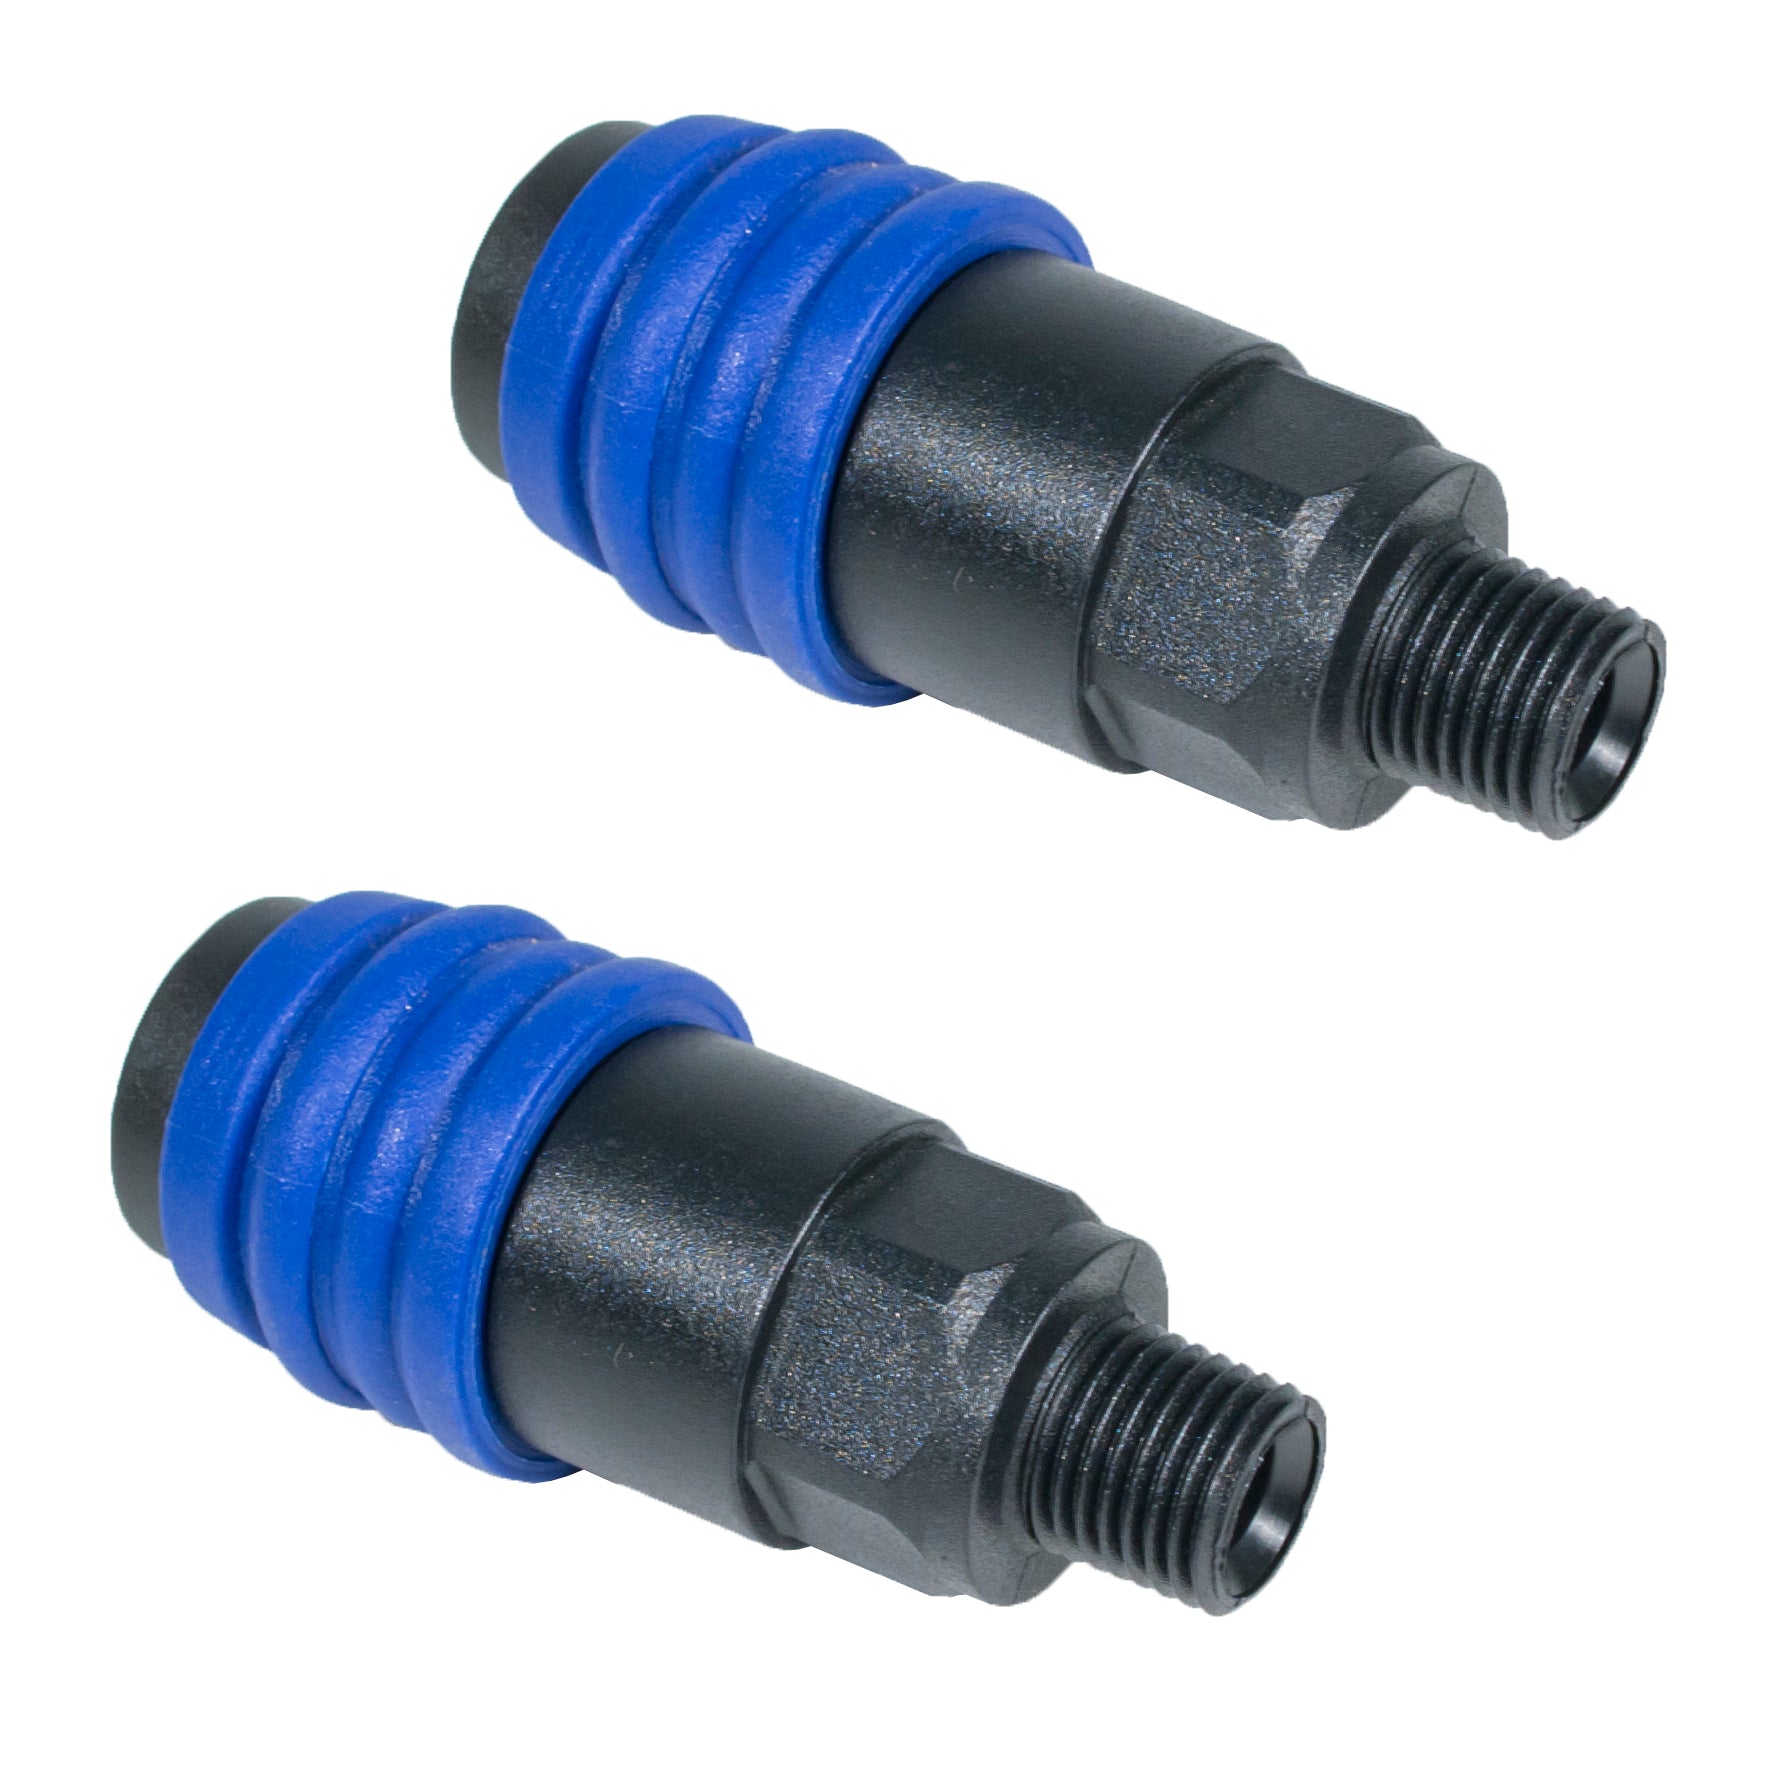 Composite One-Touch Quick Coupler - 1/4" Male (3 in 1 Accepts AMT) - (2 Pack)